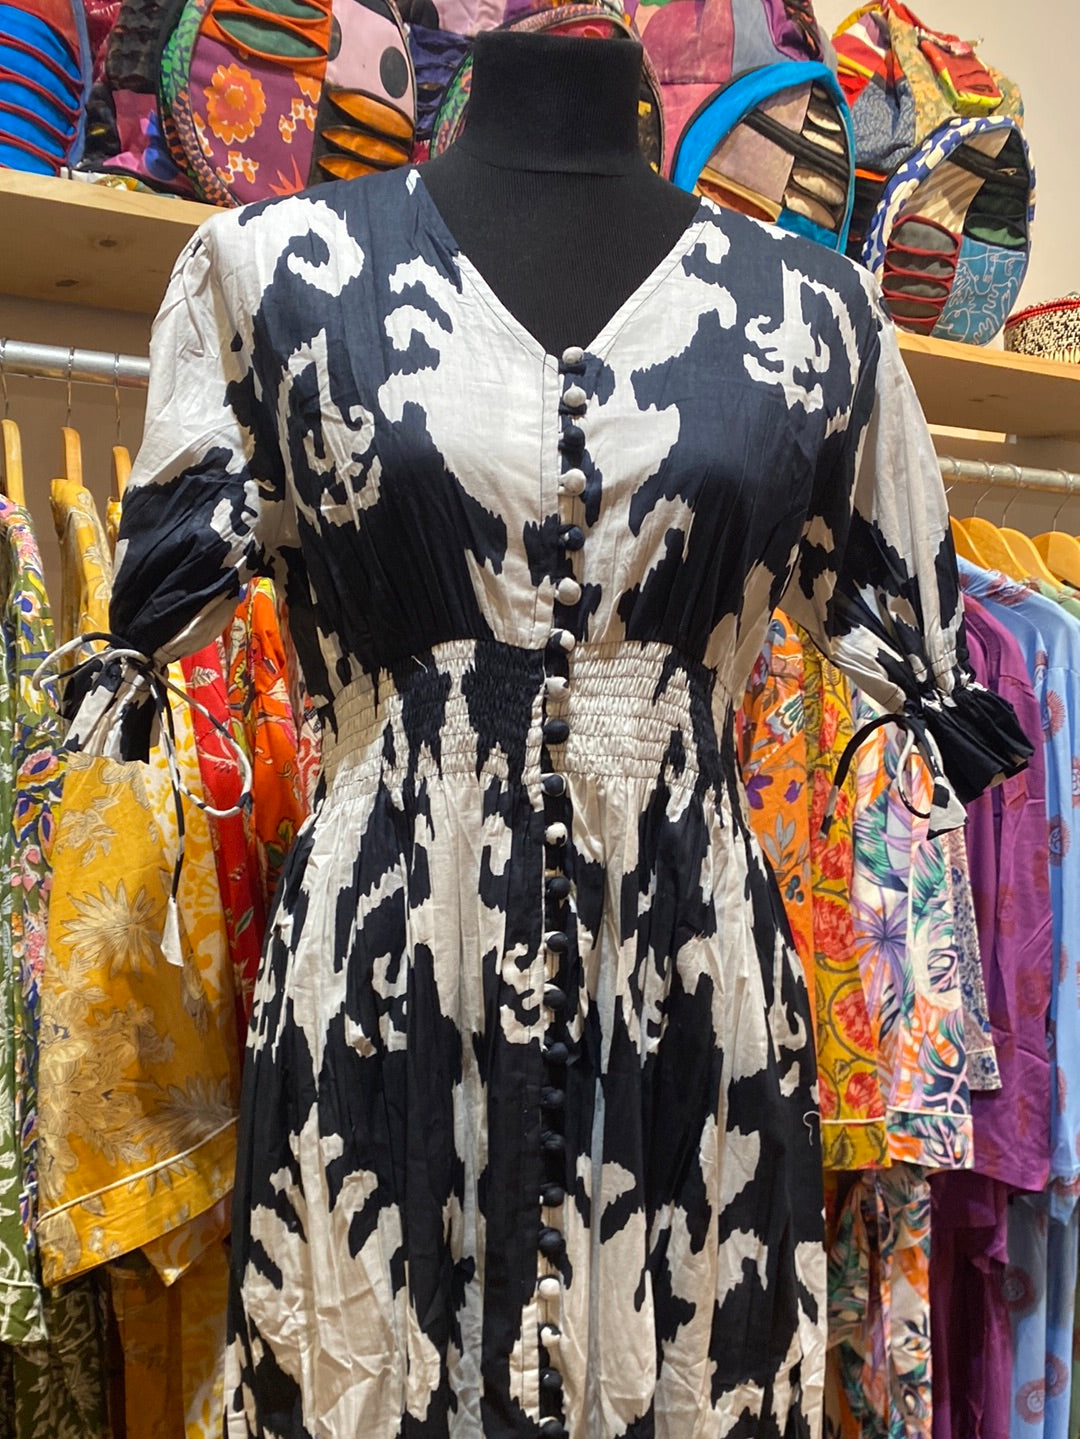 Printed Dress for Women